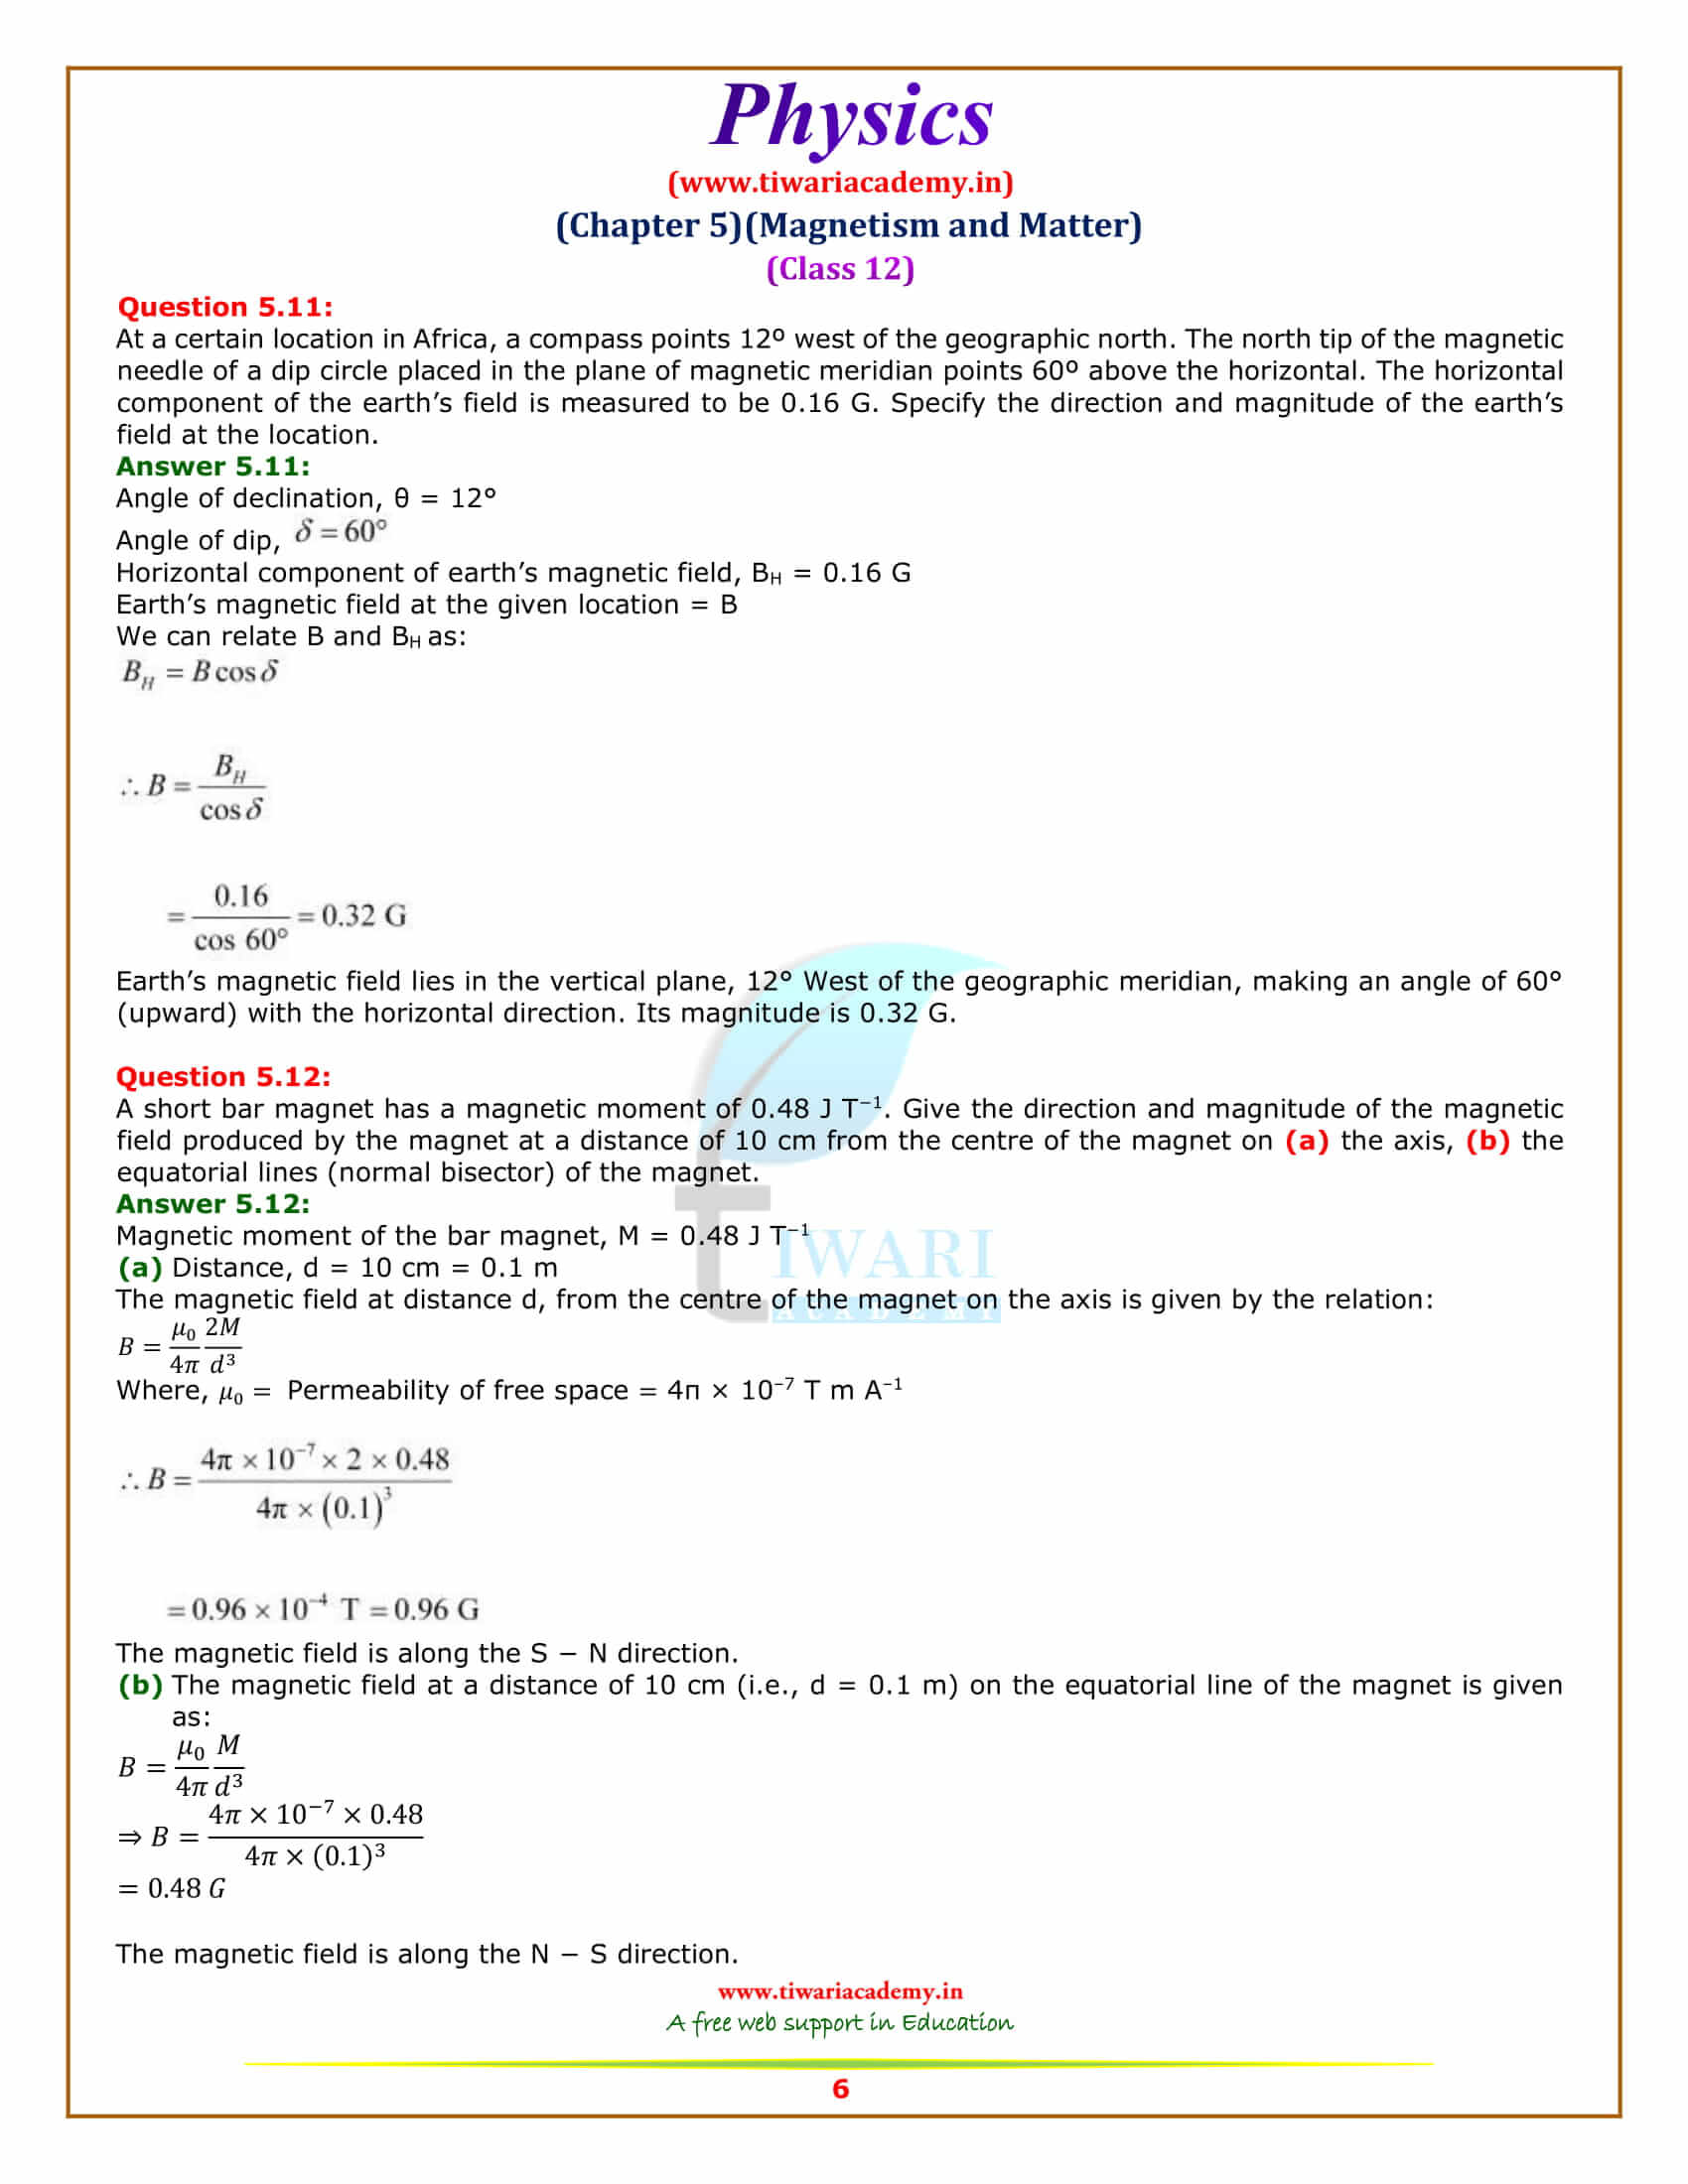 NCERT Solutions for Class 12 Physics Chapter 5 Magnetism